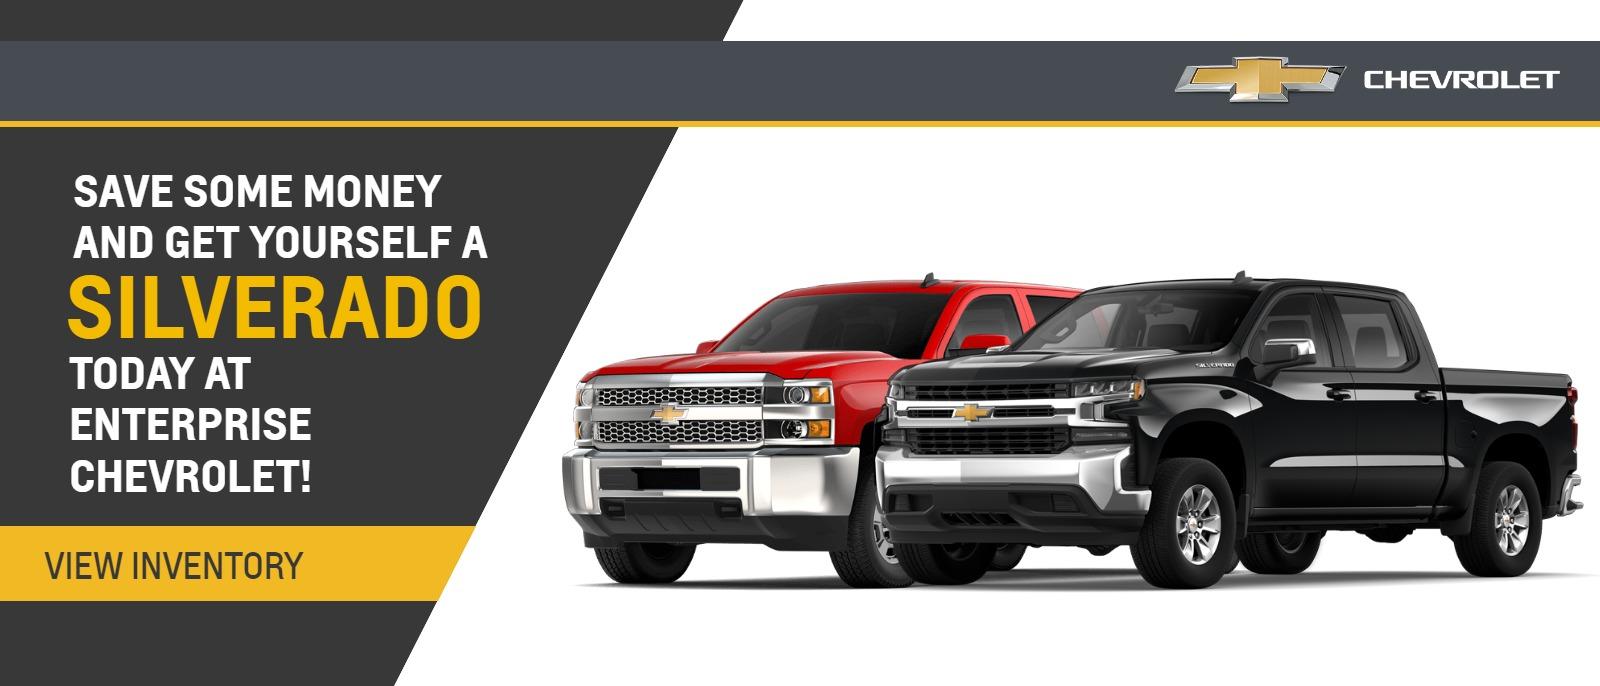 Save some money and get yourself a Silverado today at Enterprise Chevrolet!